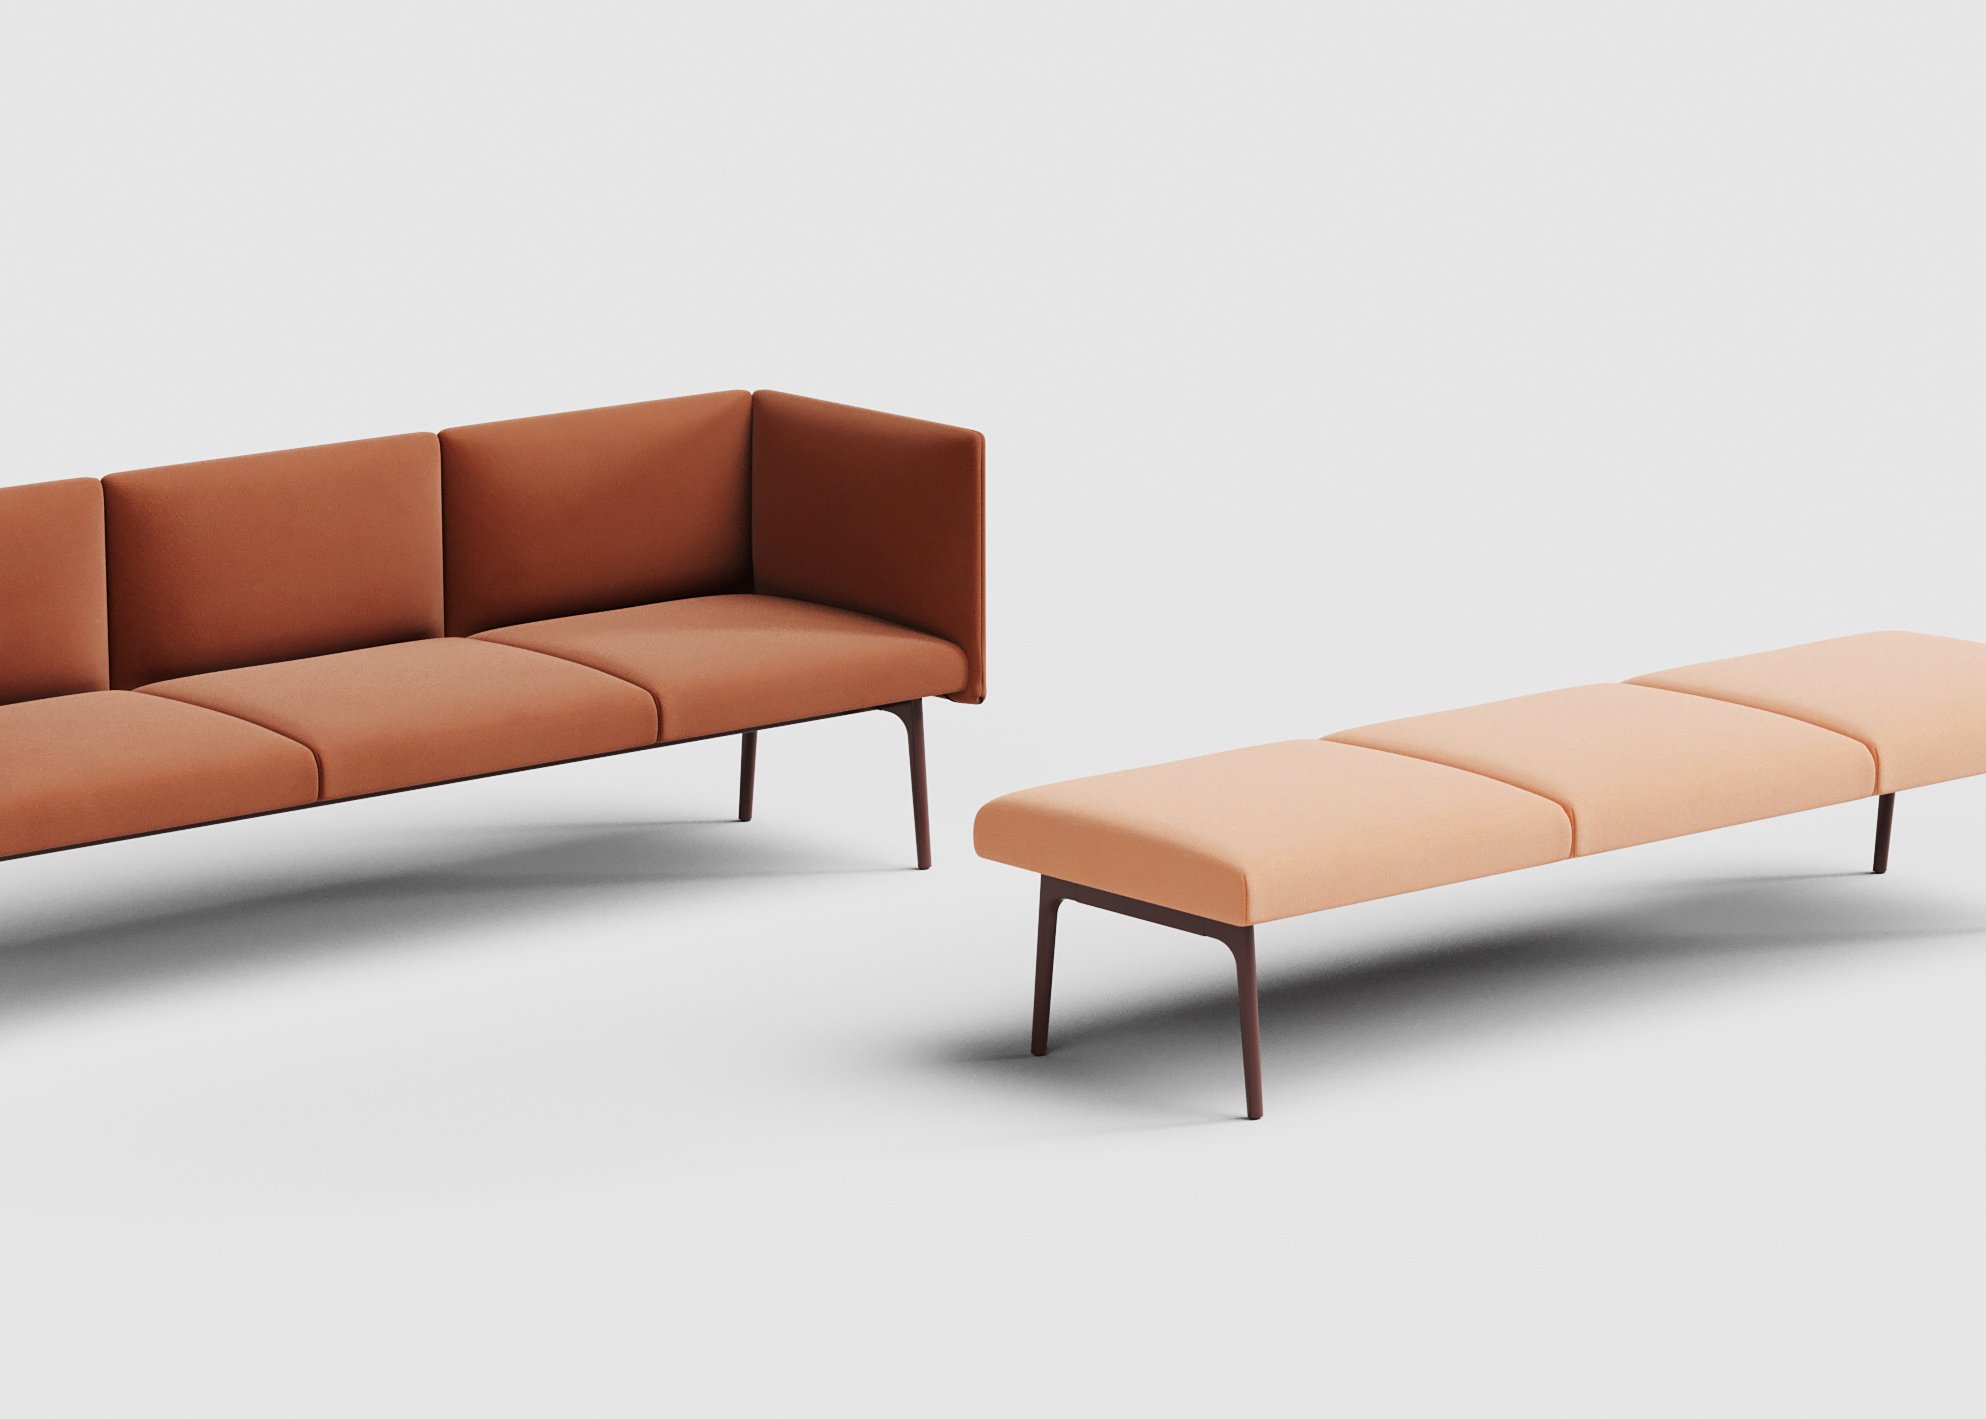 Discover the extended Mino Sofa Modular System